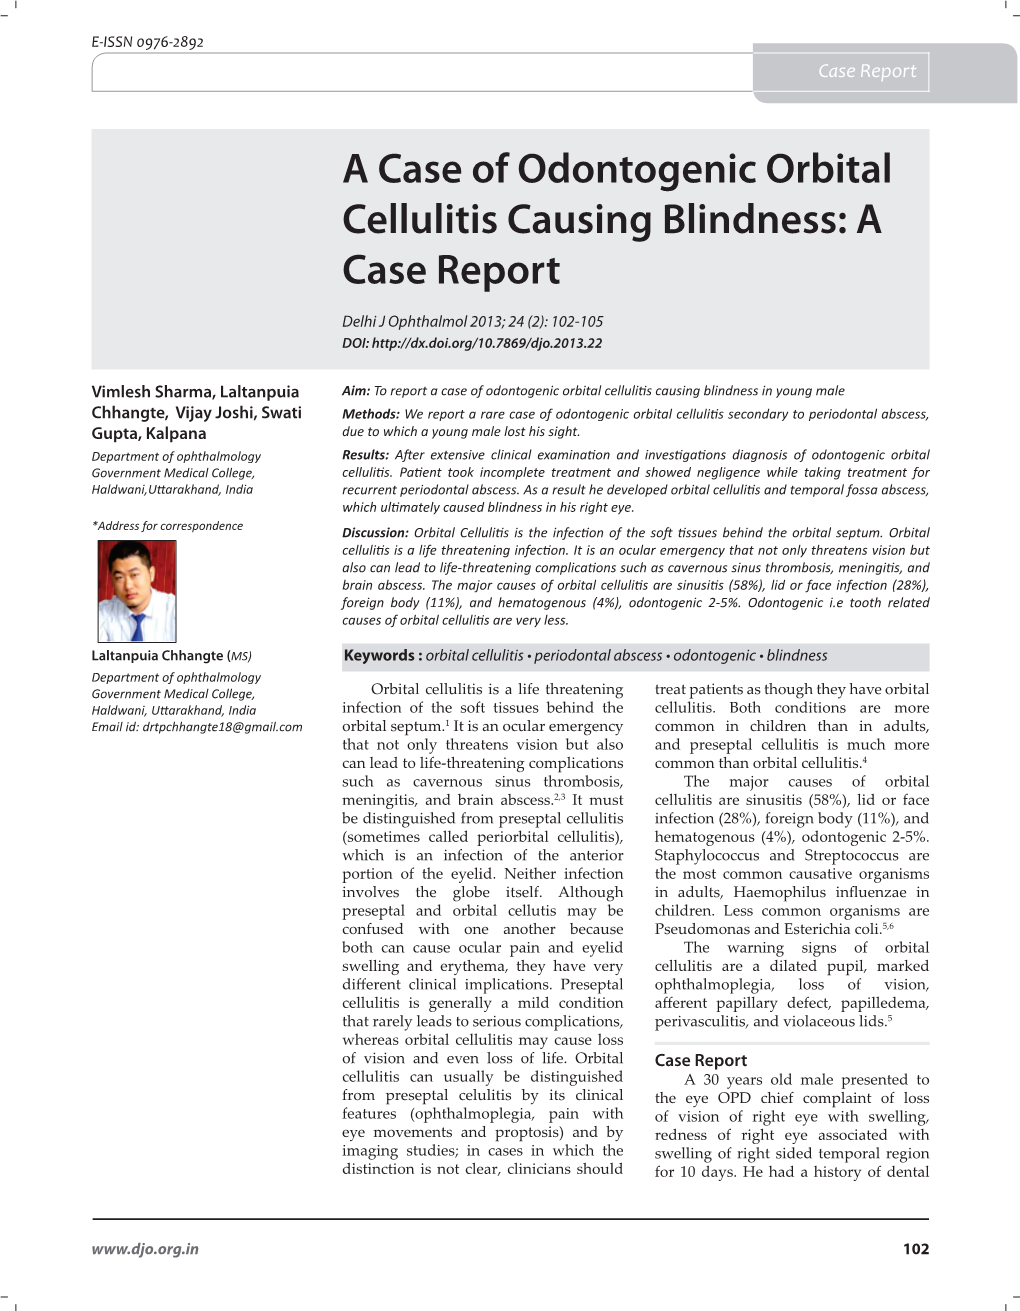 A Case of Odontogenic Orbital Cellulitis Causing Blindness: a Case Report